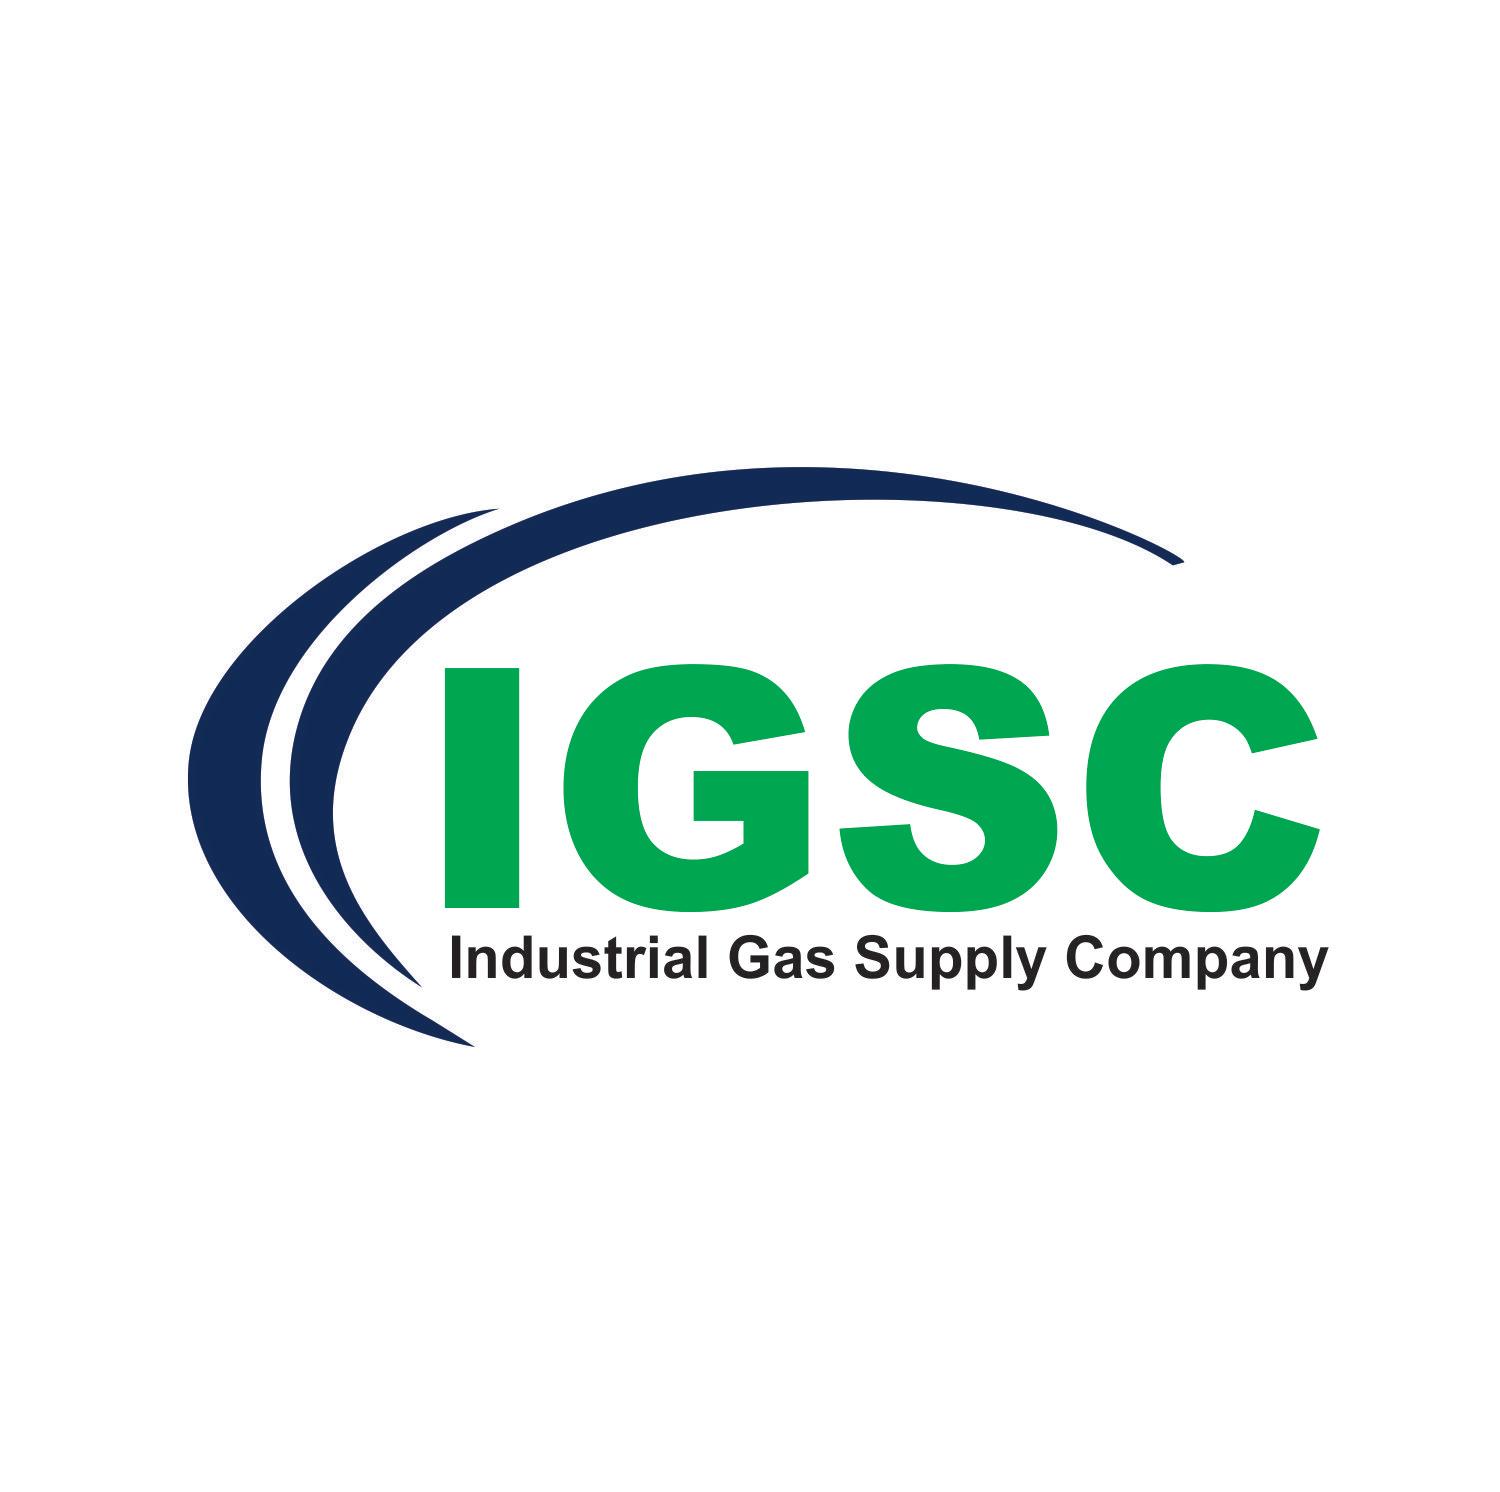 Industrial Gas Supply Company